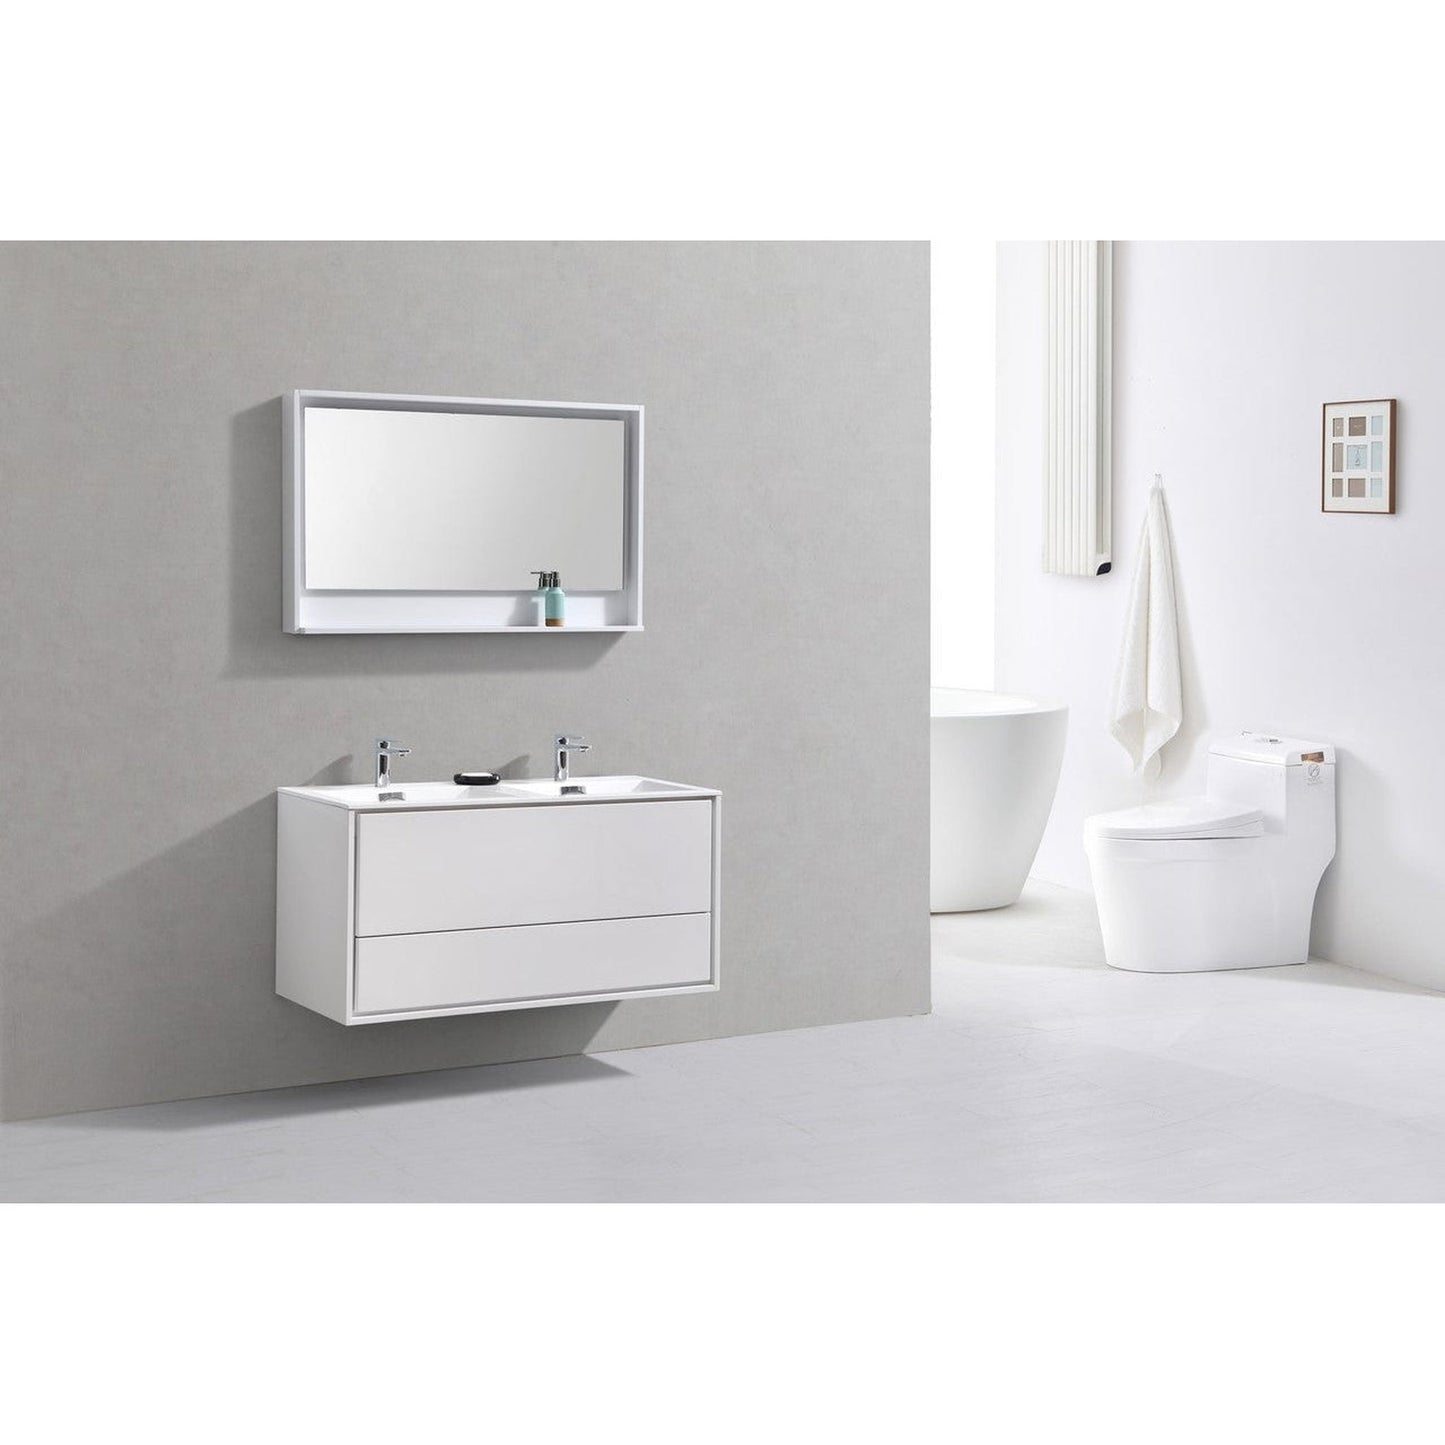 KubeBath DeLusso 48" High Gloss White Wall-Mounted Modern Bathroom Vanity With Double Integrated Acrylic Sink With Overflow